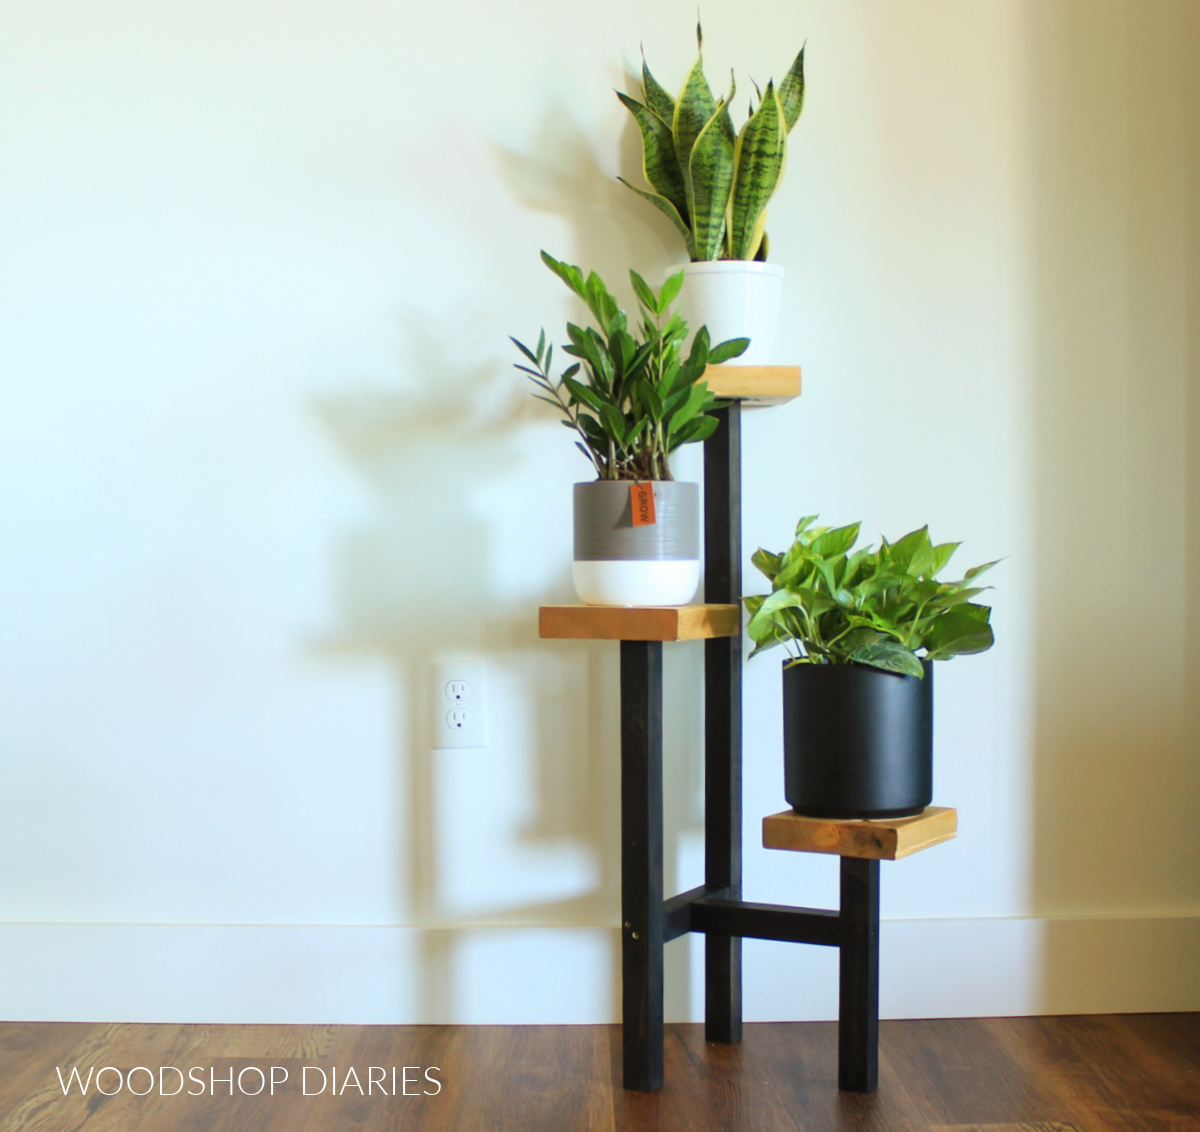 Completed plant stand black base and wood tops with three plants on each tier against white wall